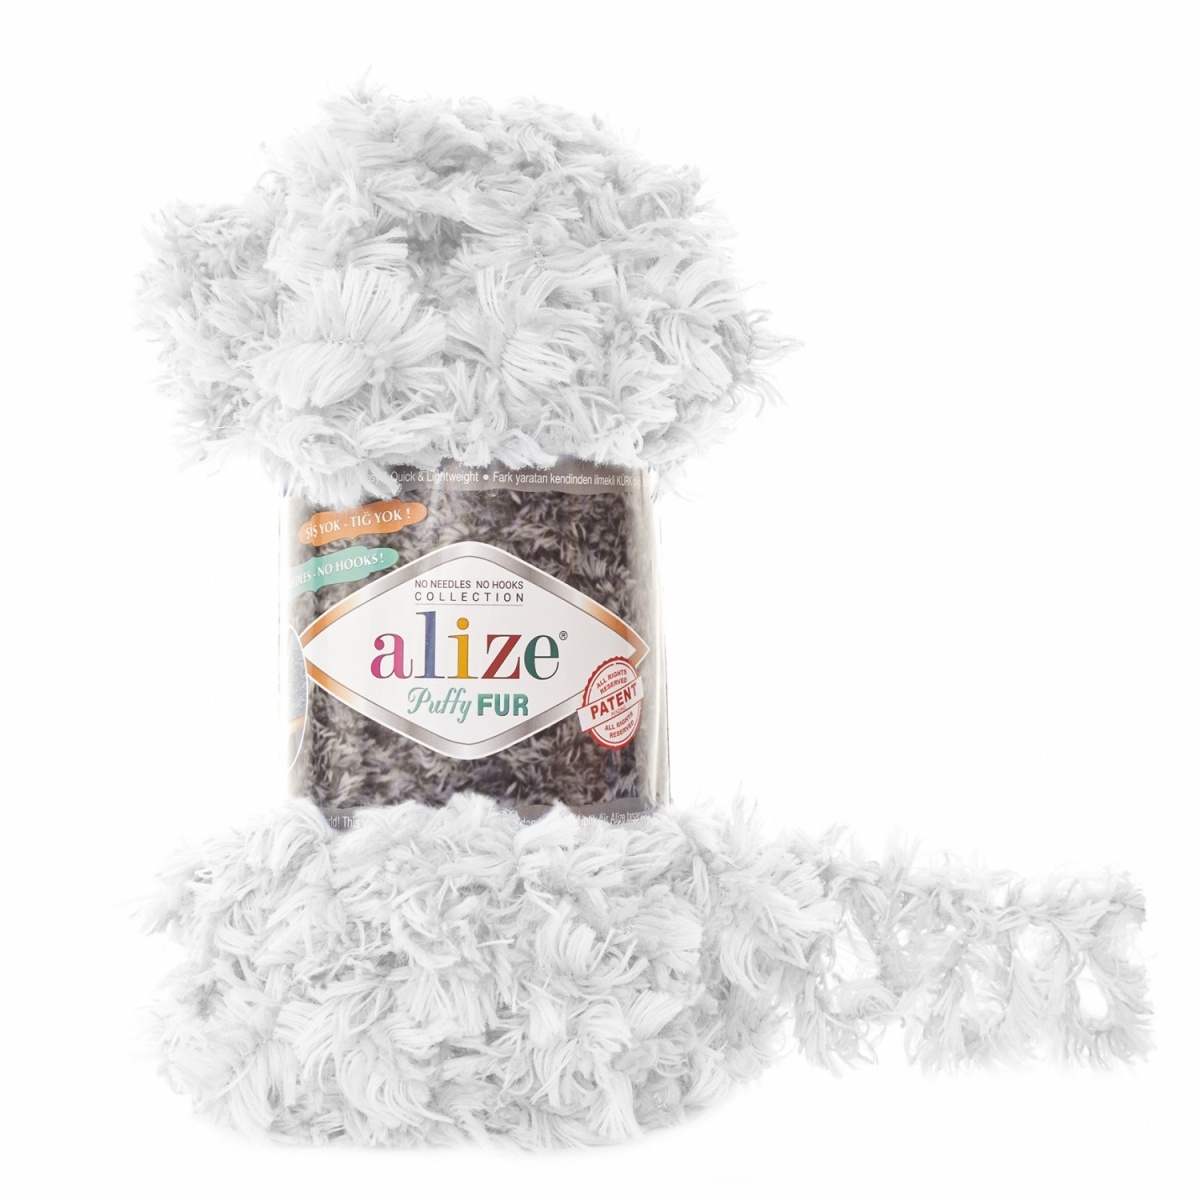 Alize Puffy Fur, 100% Polyester 5 Skein Value Pack, 500g фото 1